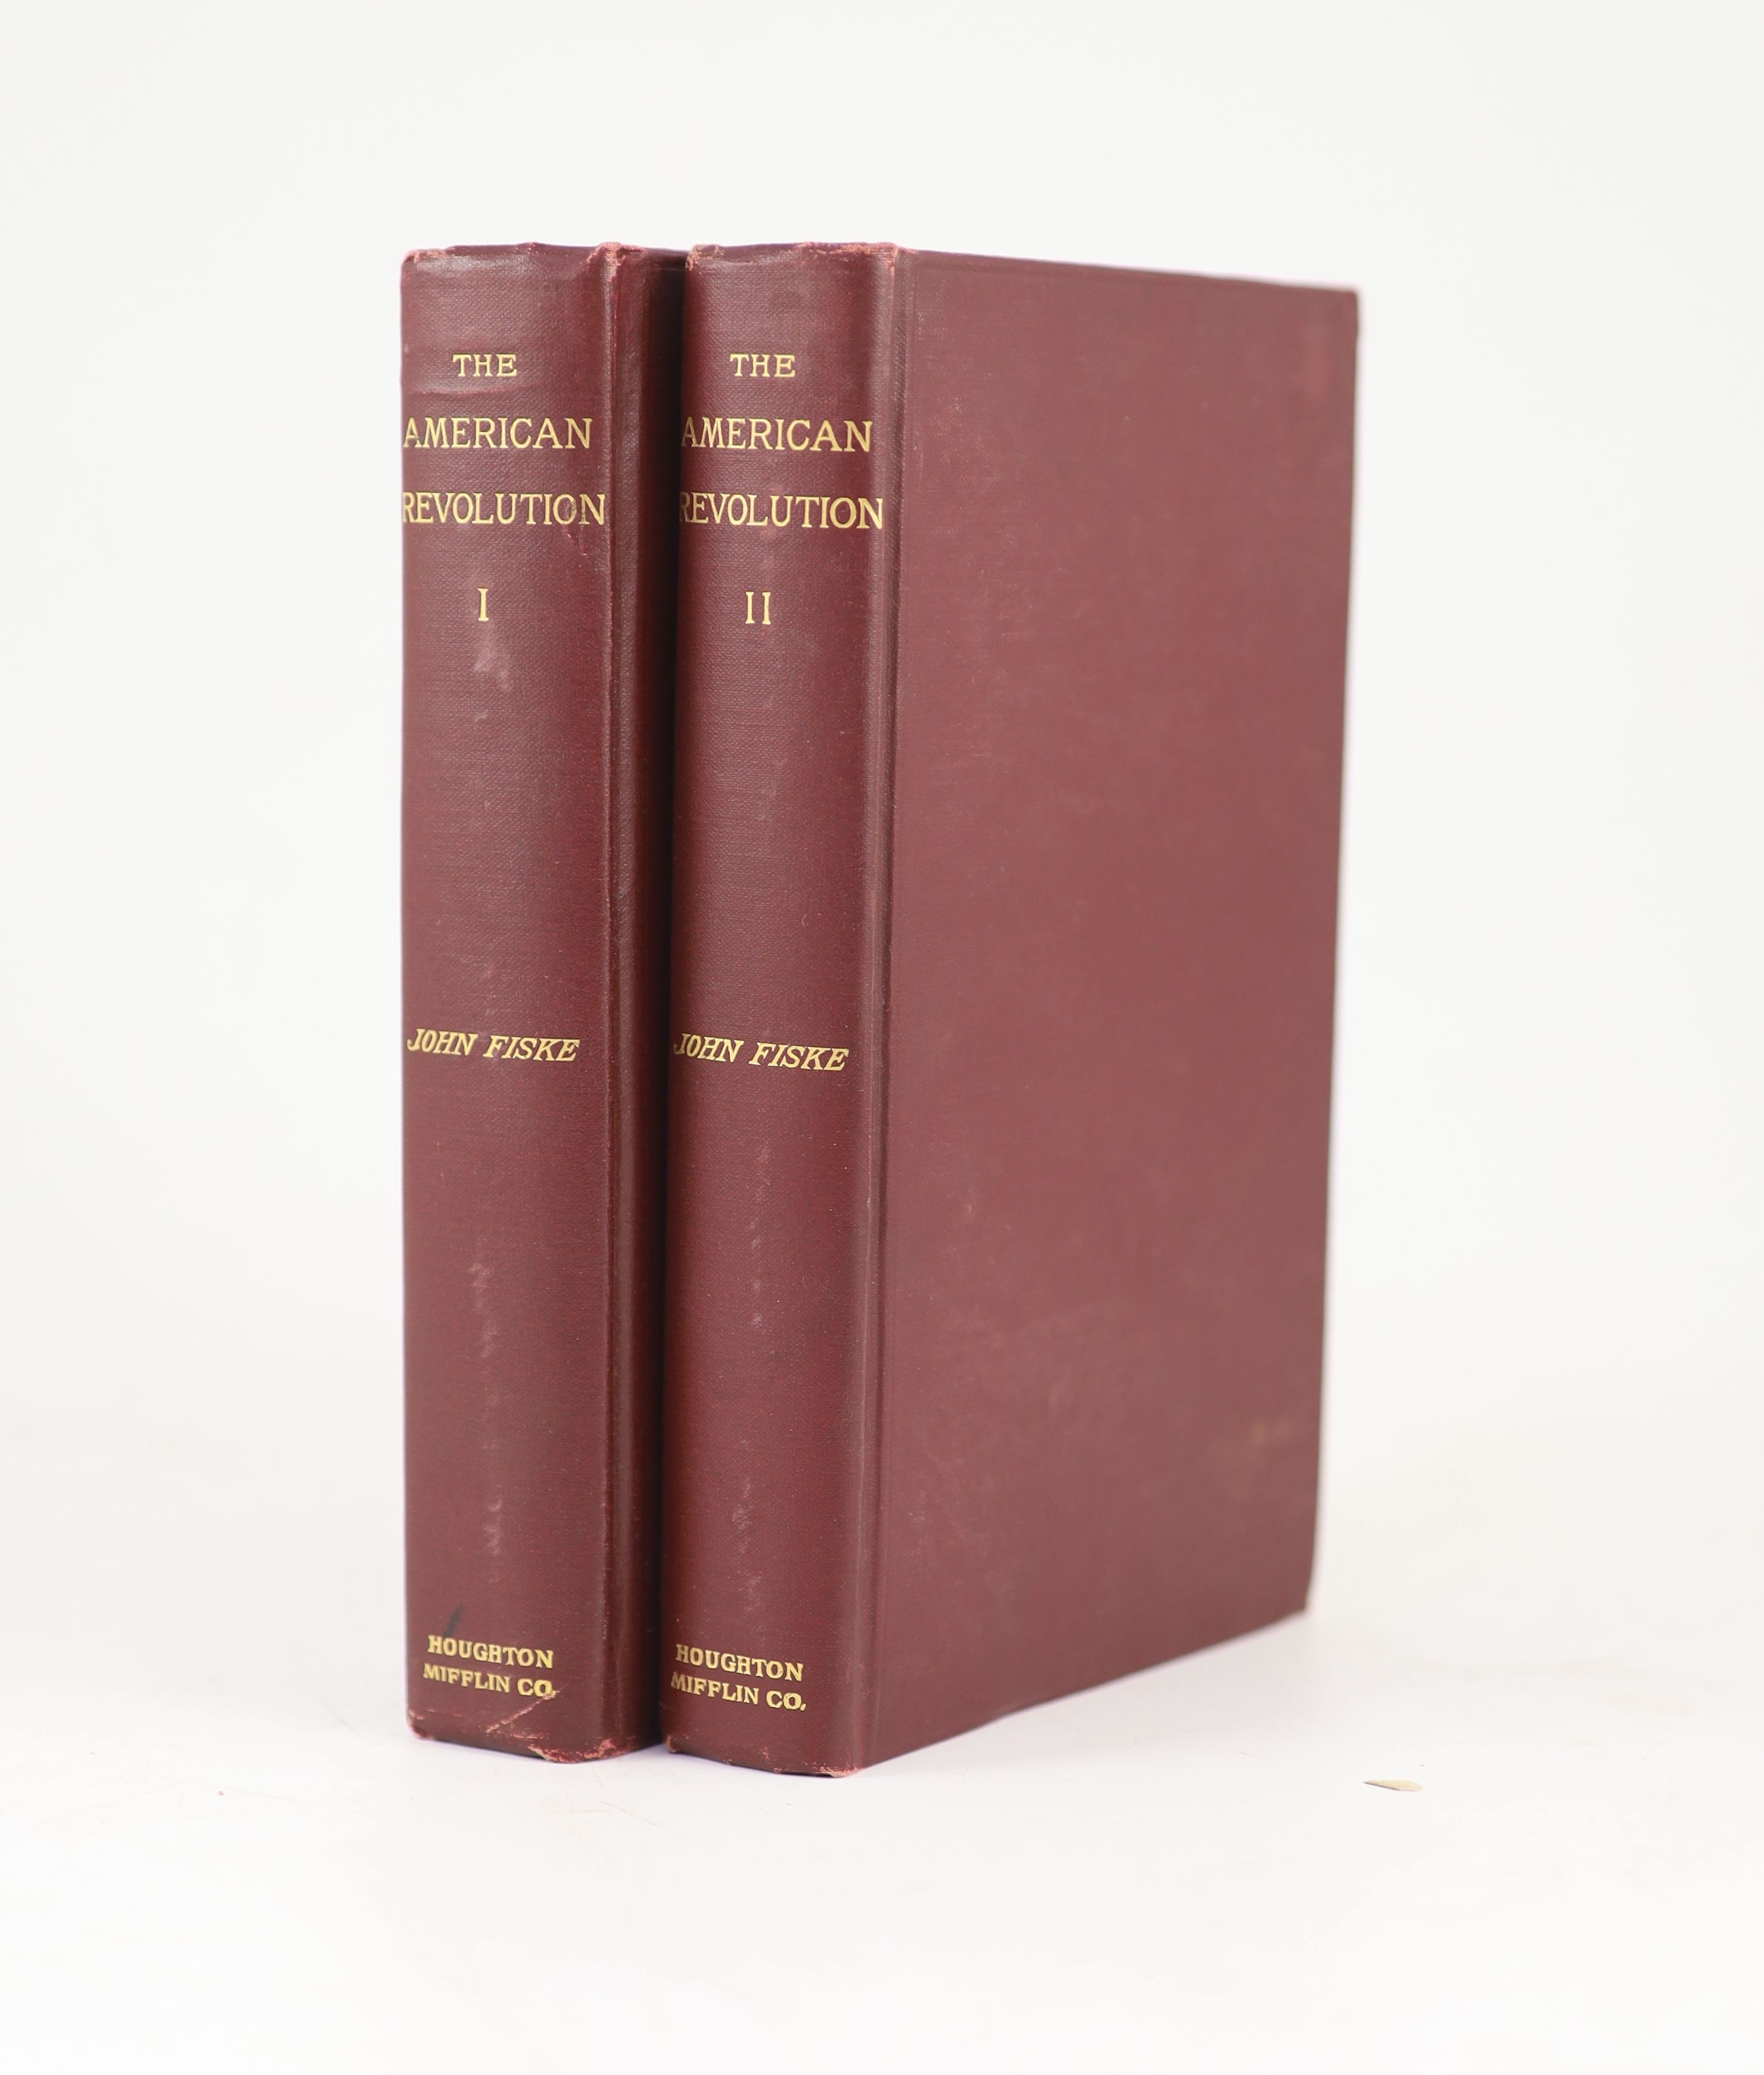 Fiske, John - The American Revolution. 2 vols. 15 plates, with guards to the 2 frontis. Red cloth with gilt letters direct and gilt top edge. Houghton Mifflin Company, Boston and New York, 1891.